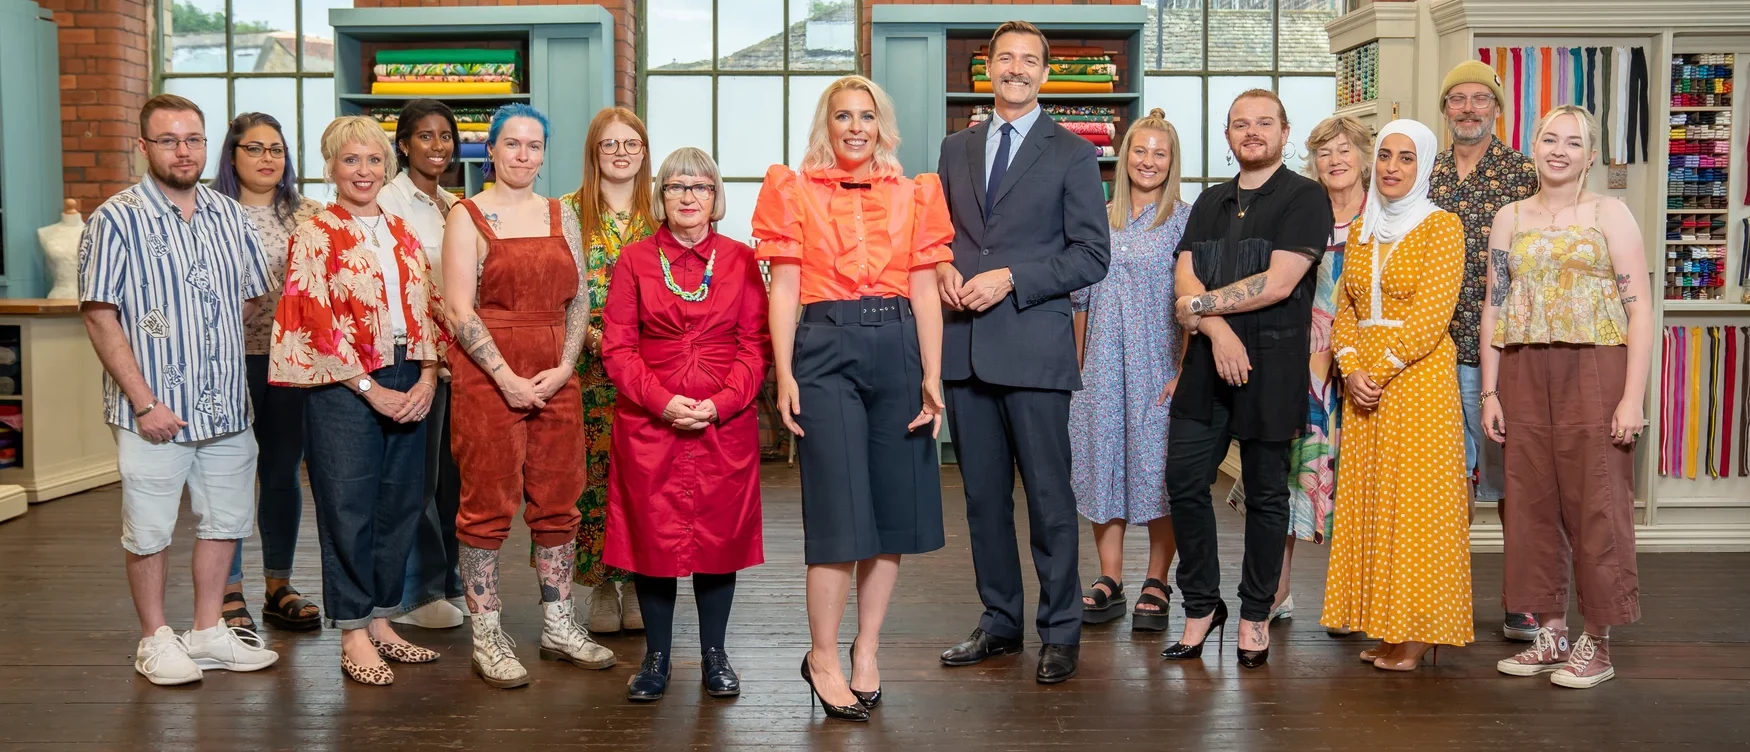 The Sewing Bee: Episode 2 recap and swimsuit ideas! | William Gee UK